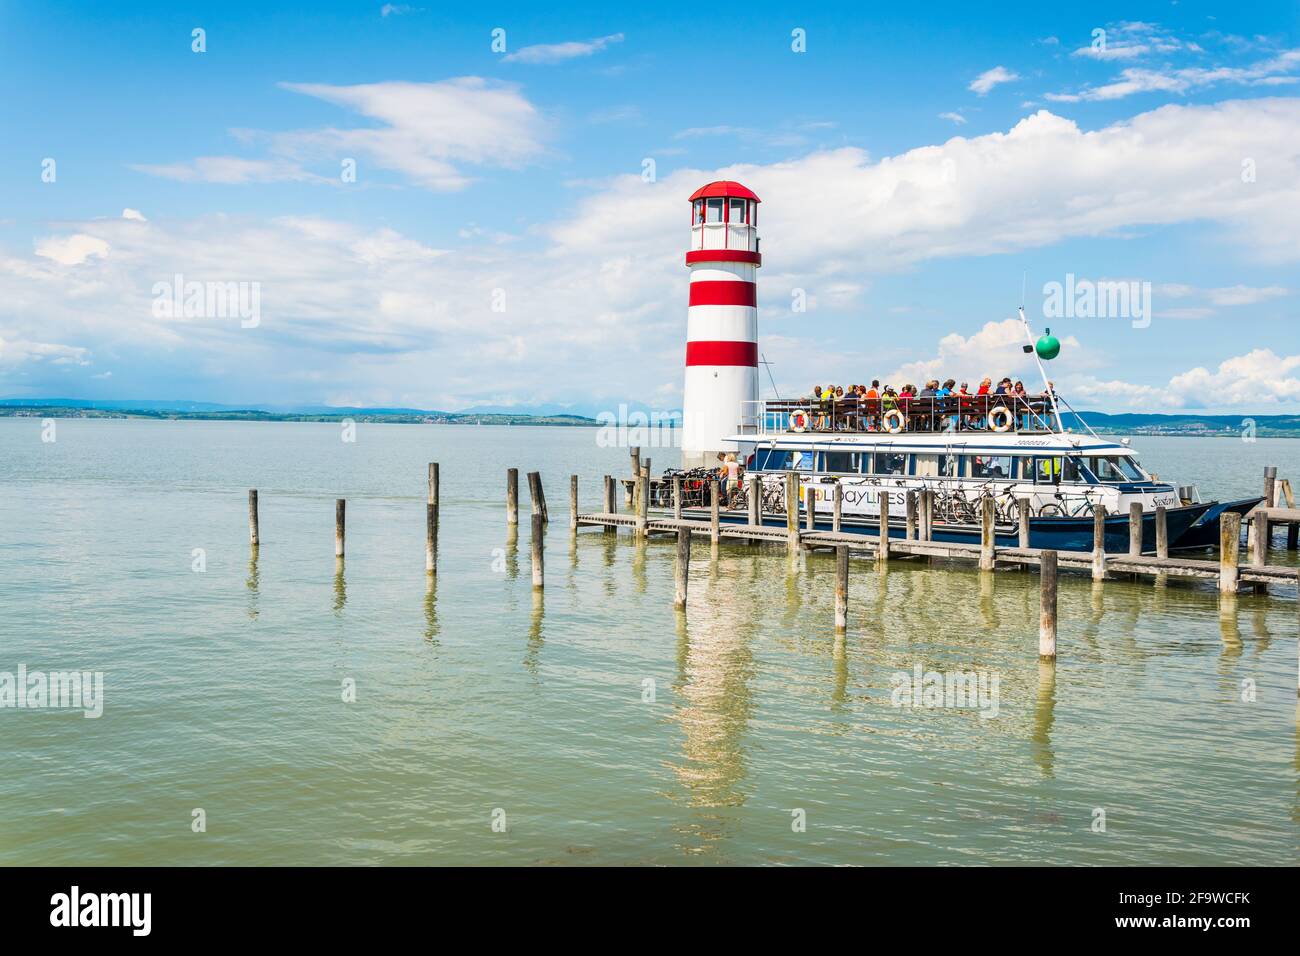 PODERSDORF AM SEE, AUSTRIA, JUNE 17, 2016:people are entering a ferry boat in podersdorf am see town situated next to neusiedlersee in austria. Stock Photo